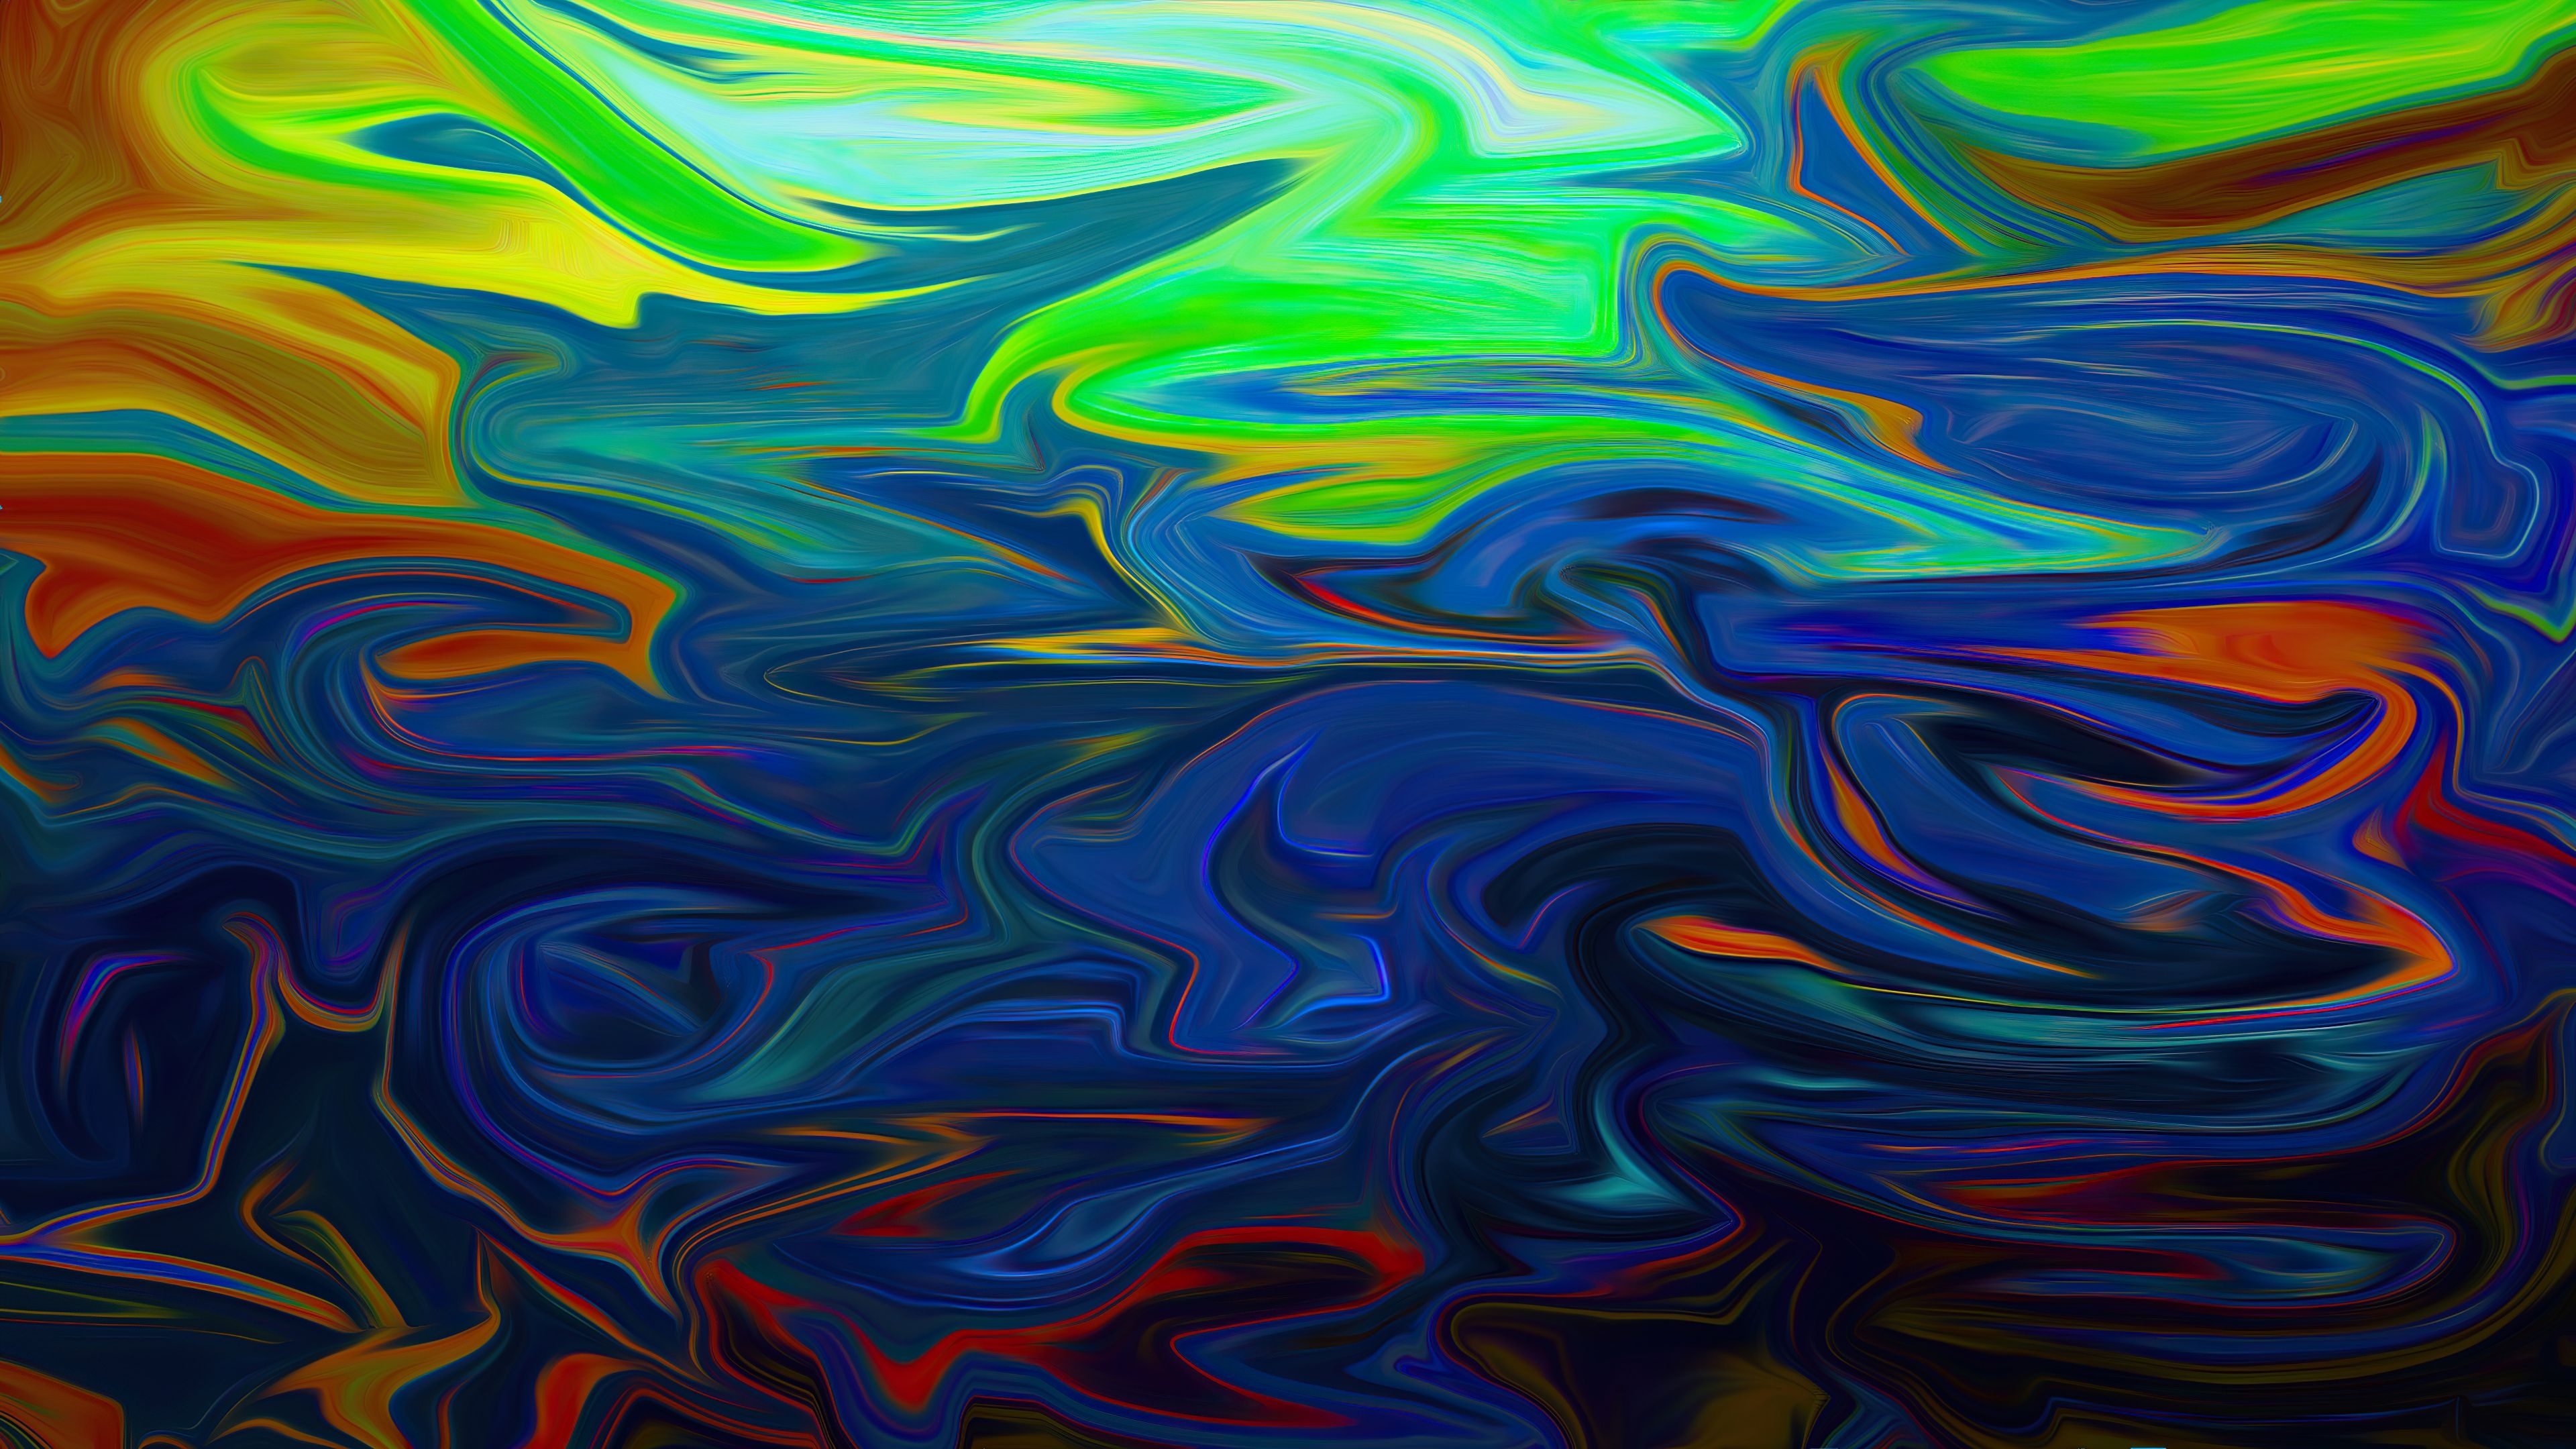 Holographic wallpapers, Fluid and abstract, Colorful and vibrant, Visual illusions, 3840x2160 4K Desktop